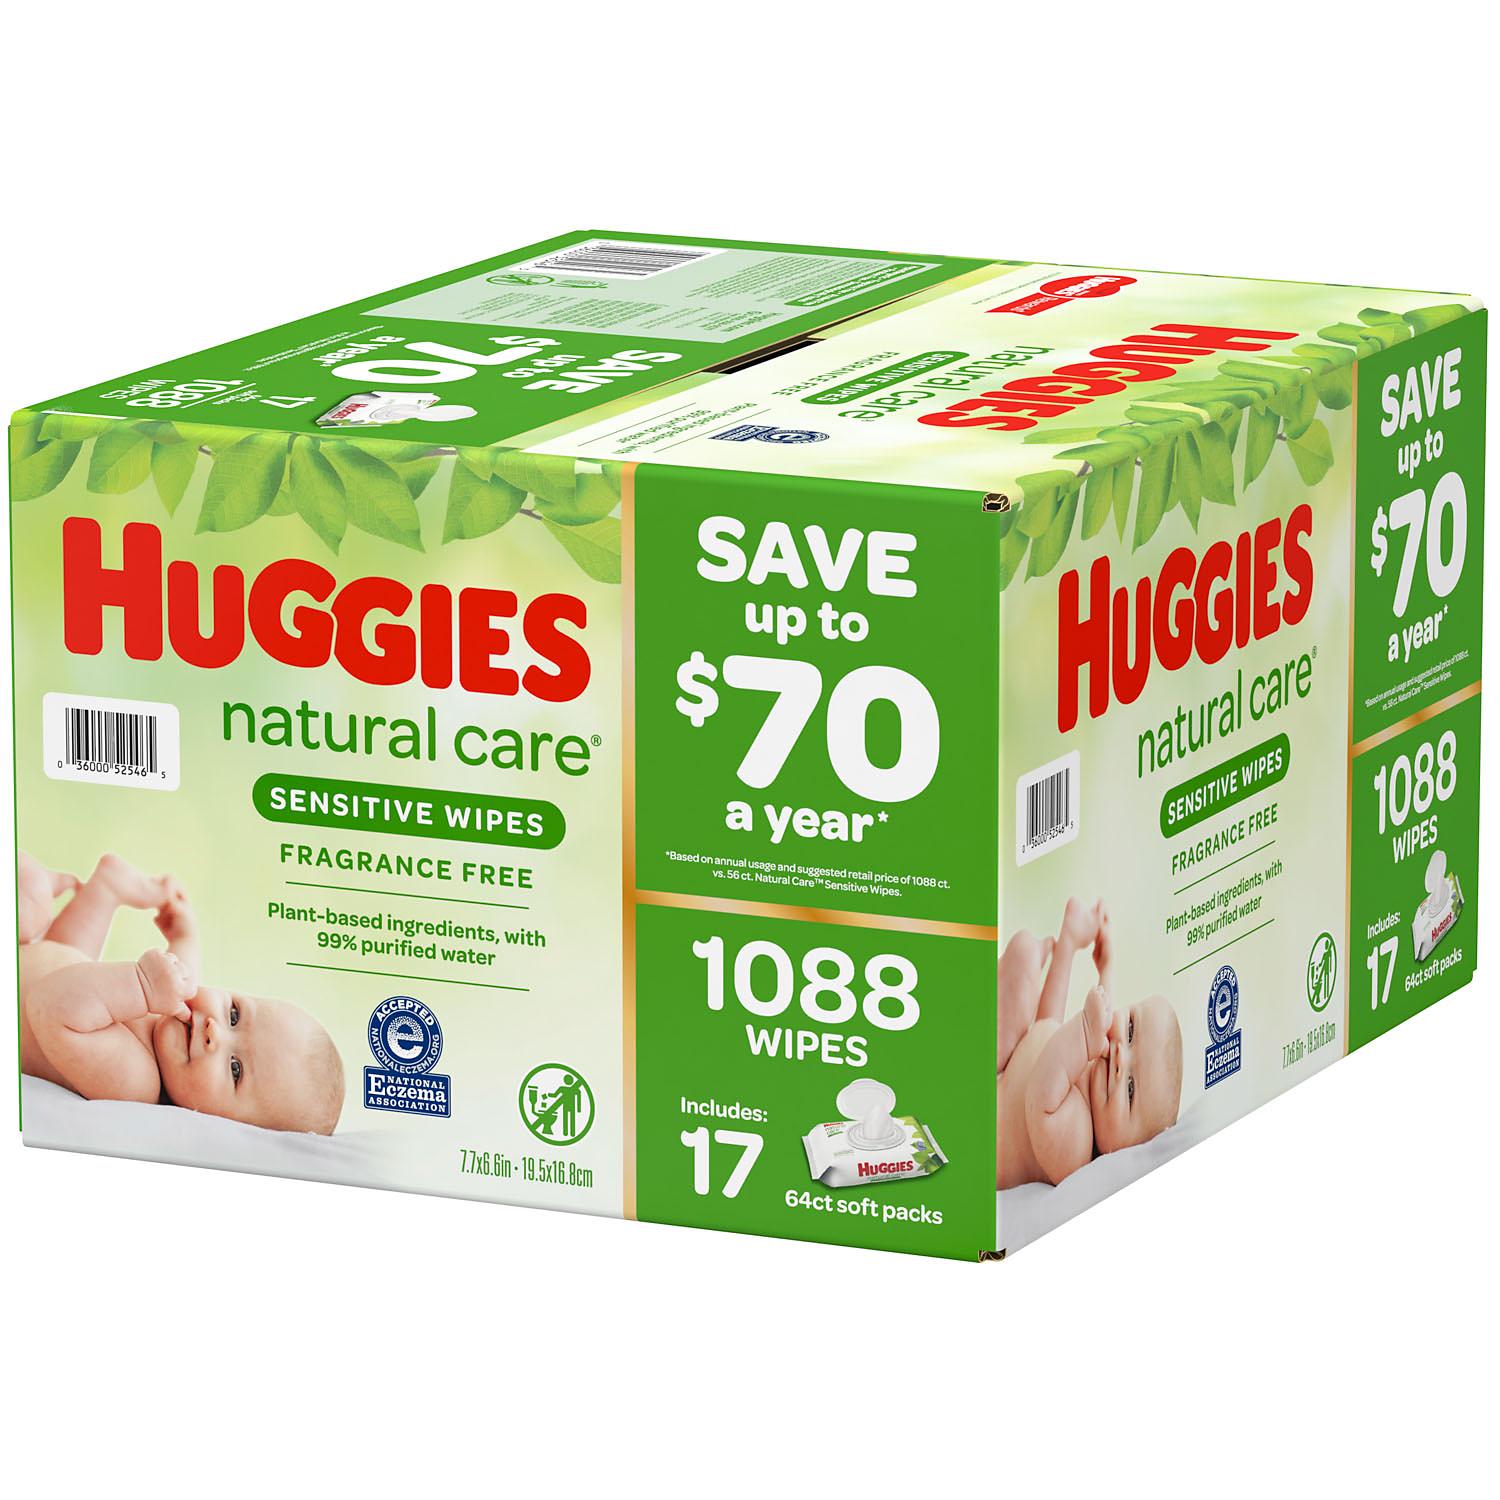 Huggies Natural Care Sensitive Baby Wipes, Unscented, (17 flip-top pks., 1088 wipes) - image 3 of 3